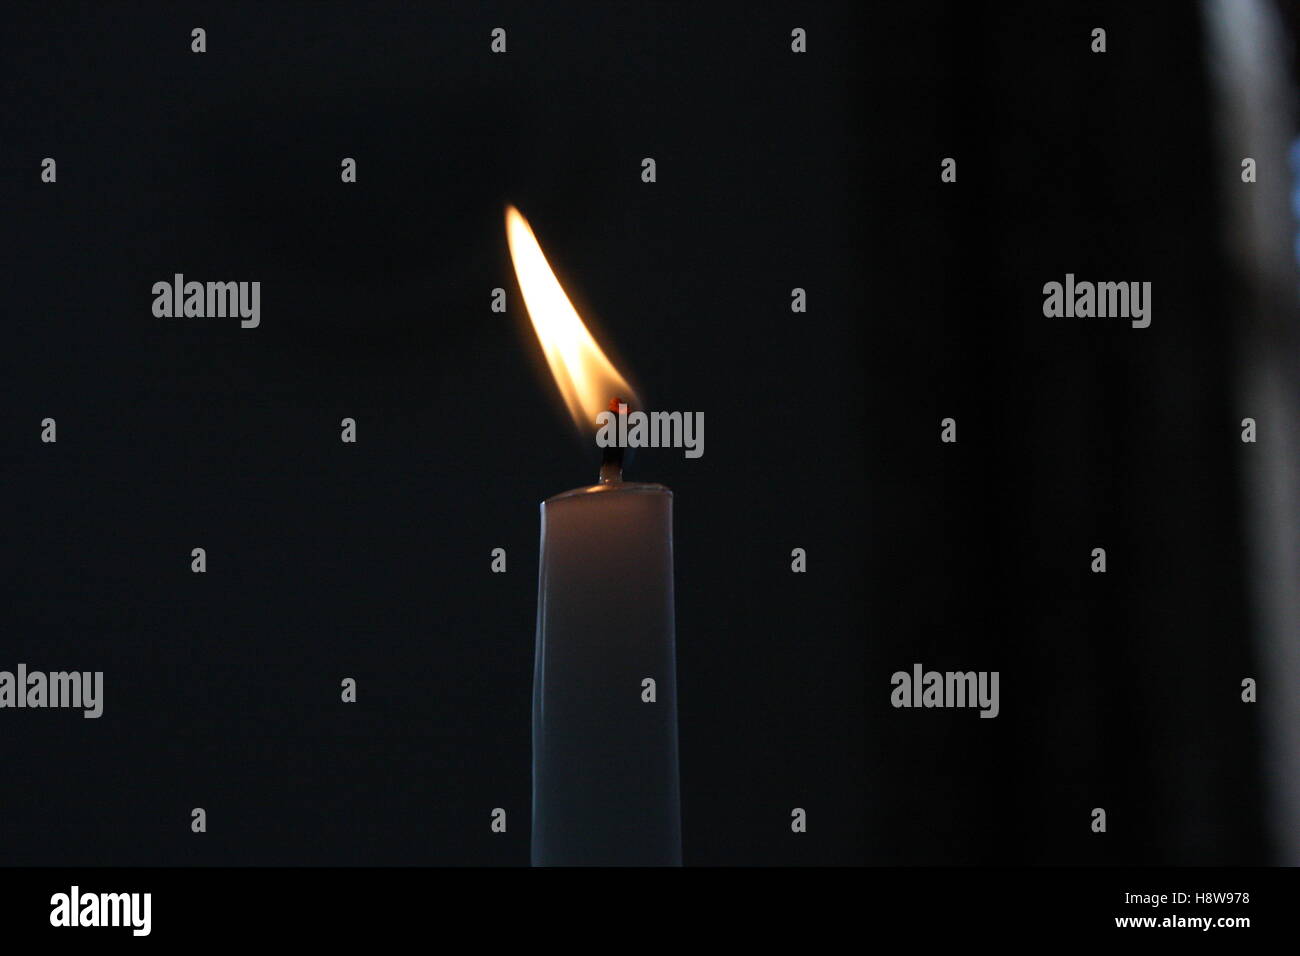 close up of a white candle flame Stock Photo